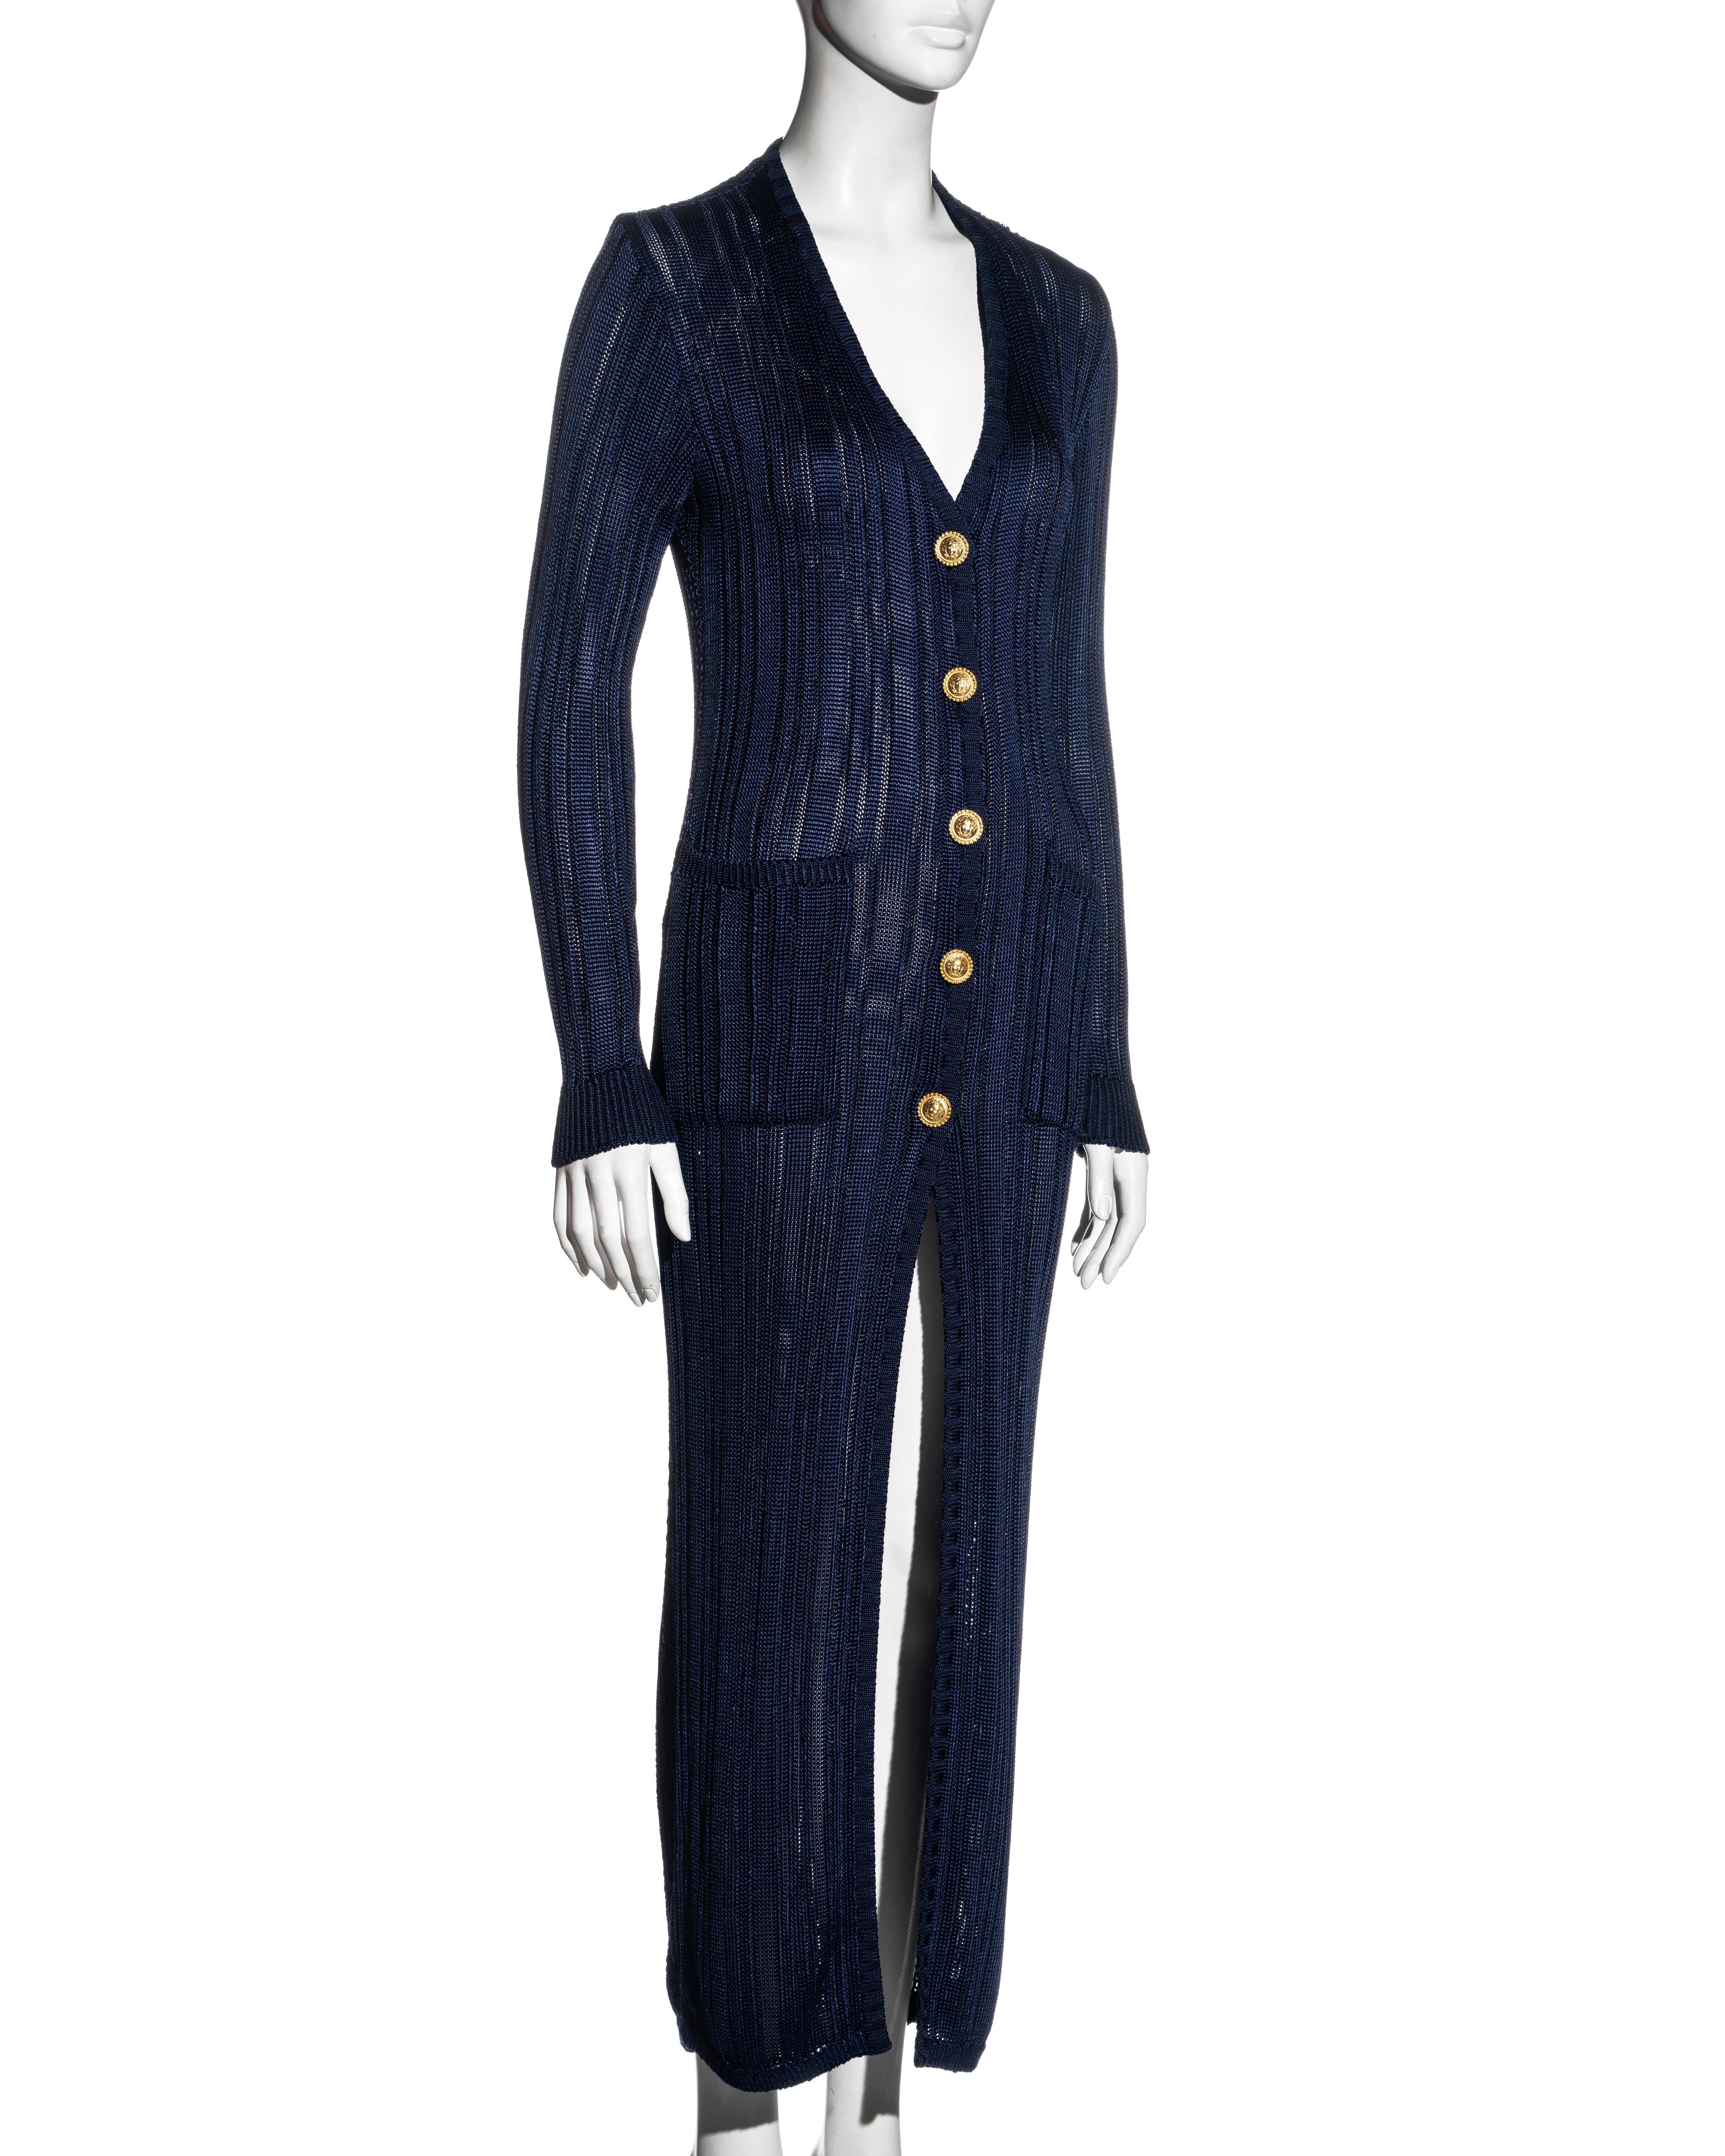 Gianni Versace navy blue open-knit bodycon dress and cardigan set, fw 1993 For Sale 2